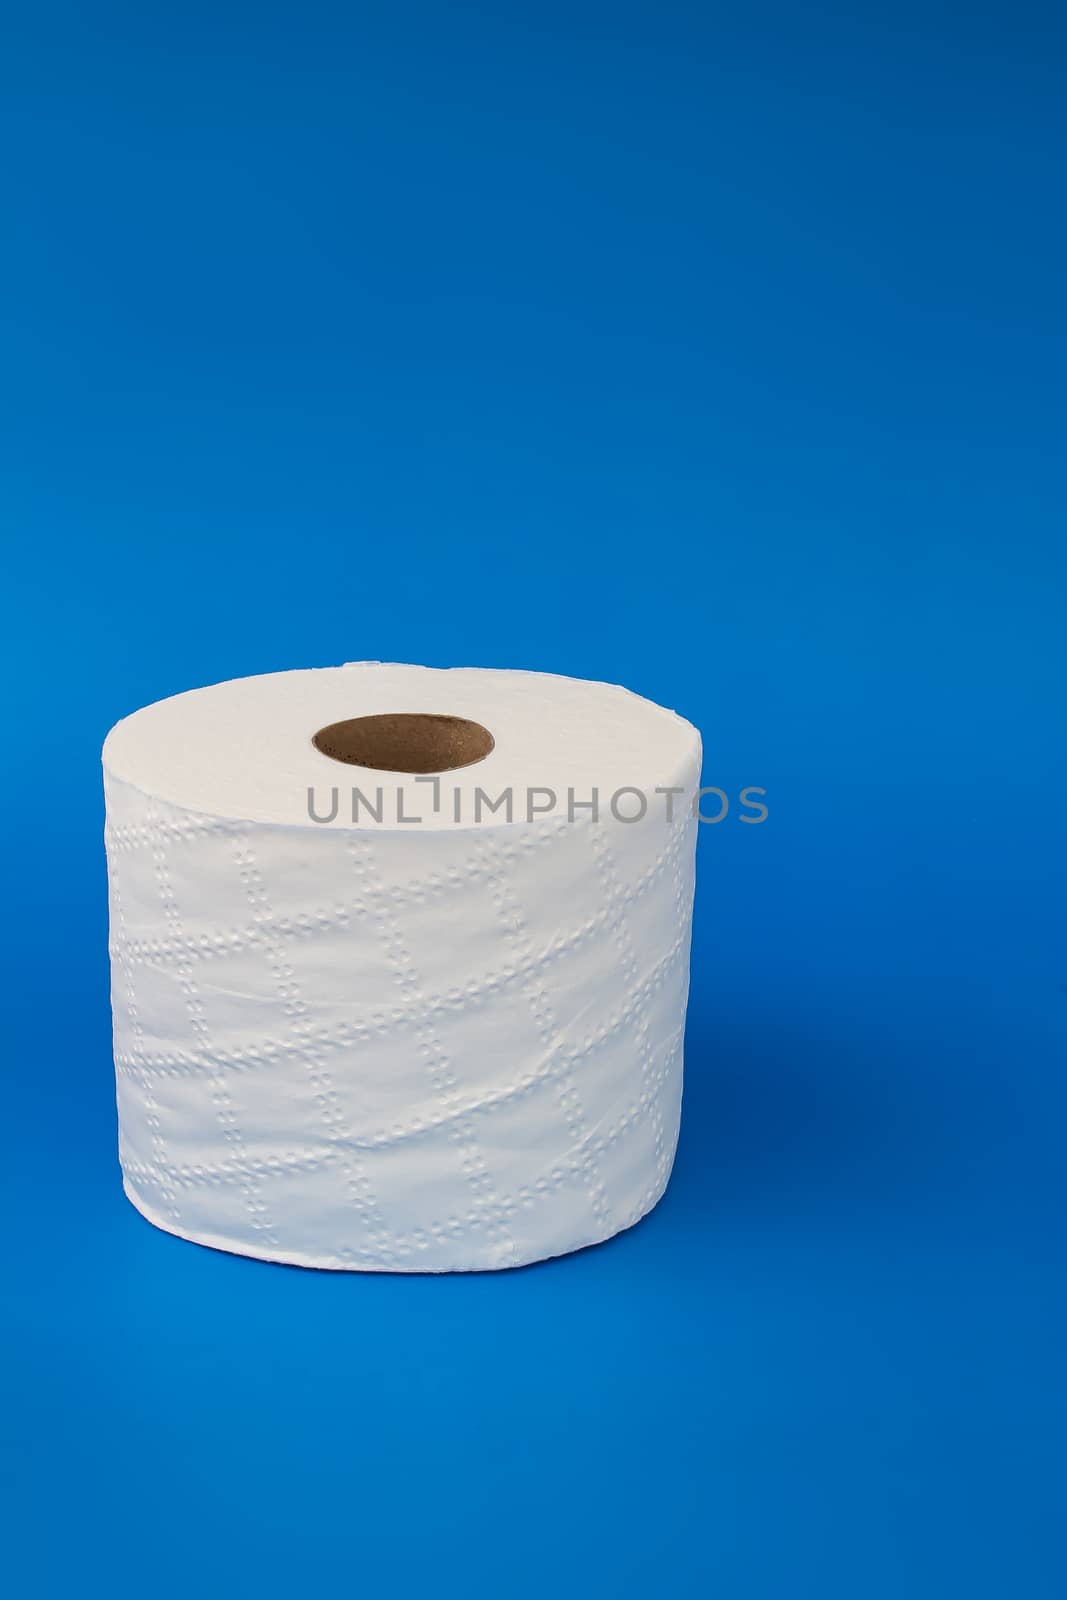 Toilet paper on a blue background with soft shadow